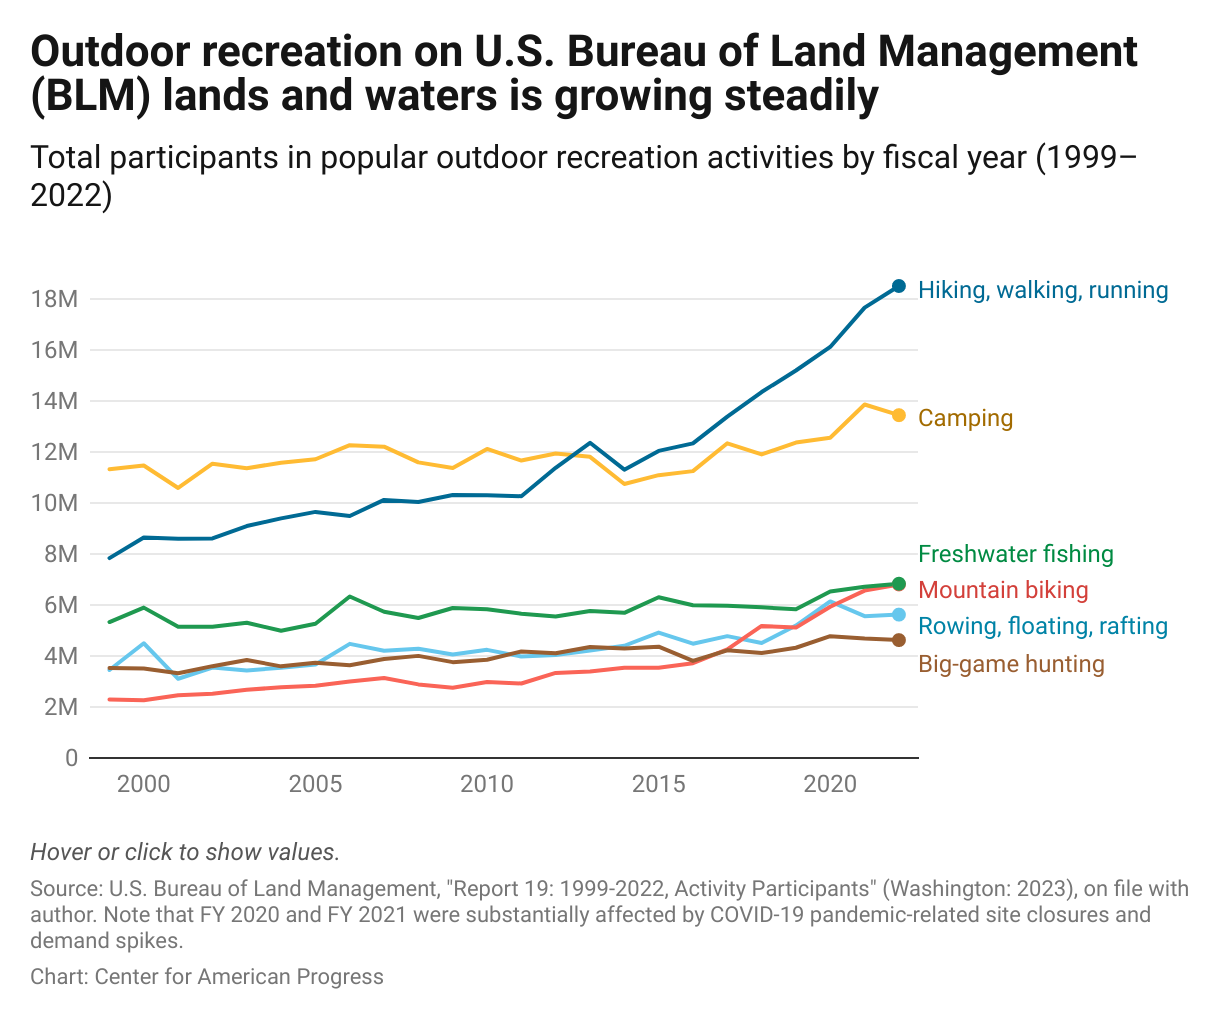 Agency visitation data show that outdoor recreation on BLM lands and waters has grown steadily over the past 24 years for popular activities such as camping, hiking/walking/running, mountain biking, freshwater fishing, big-game hunting, and rowing/floating/rafting.